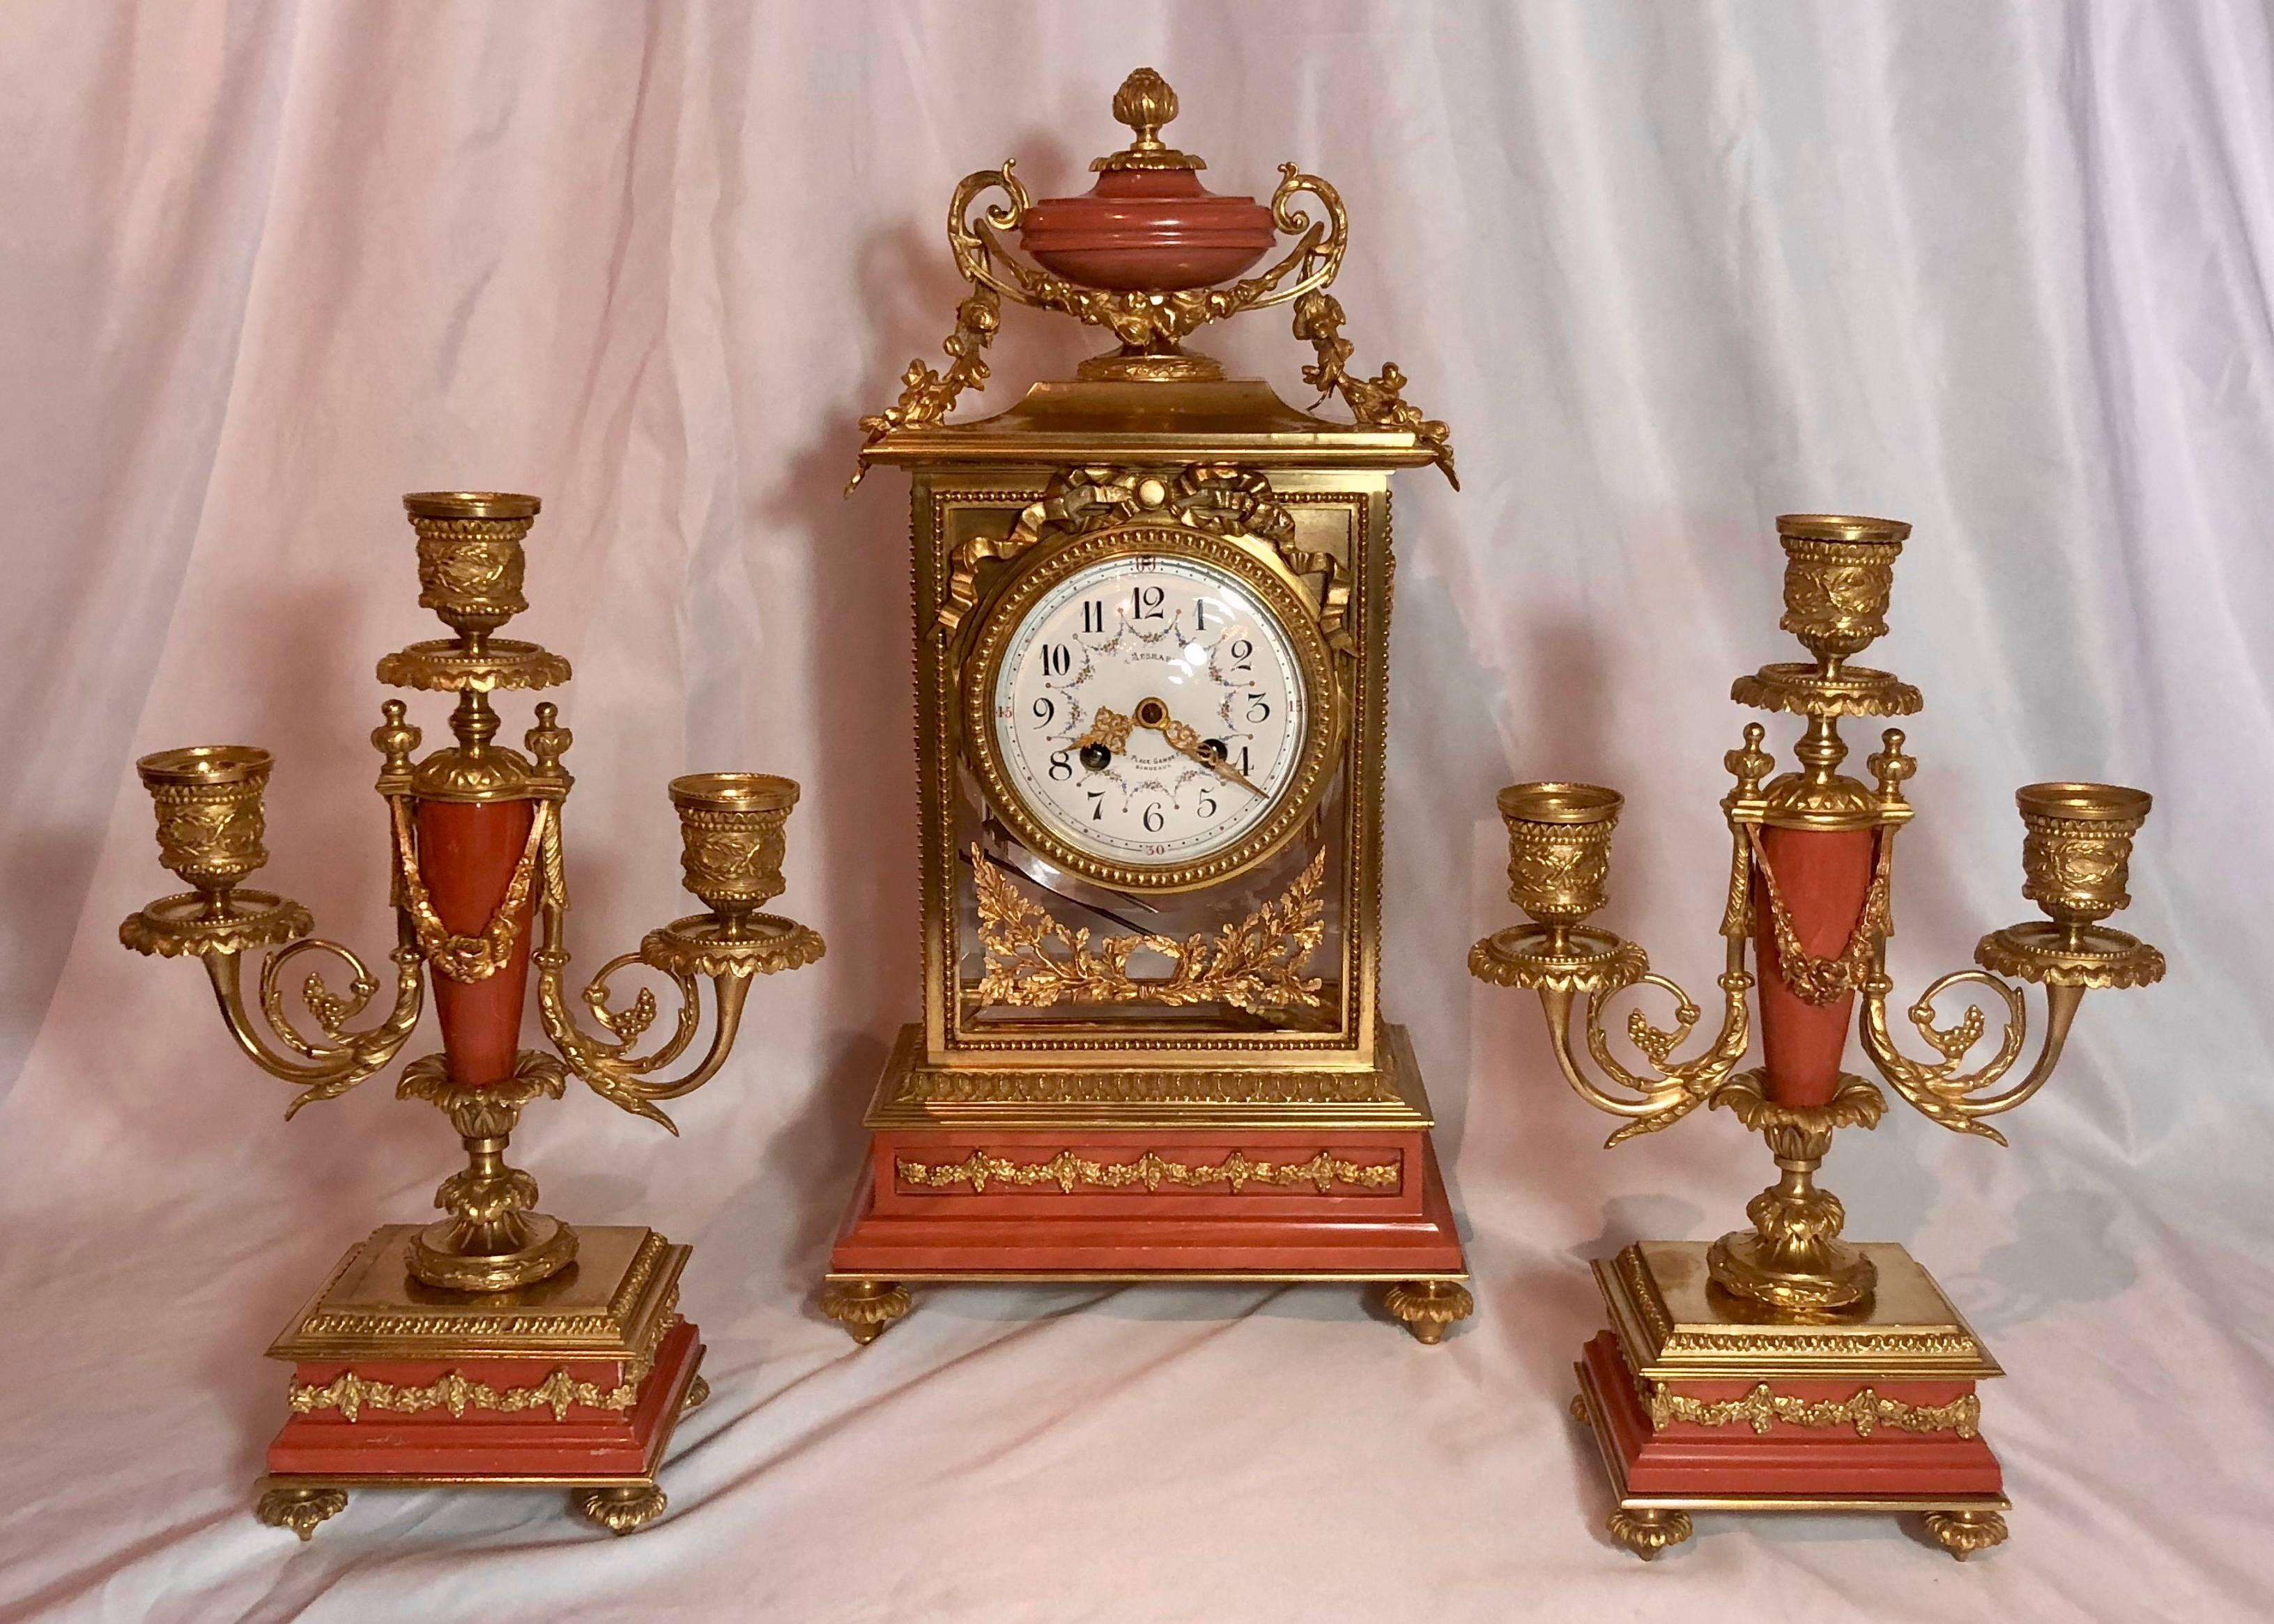 Antique French Louis 16th marble and bronze clock set, circa 1870.

Candle measurements: 11.25 x 4.5 x 3.75.